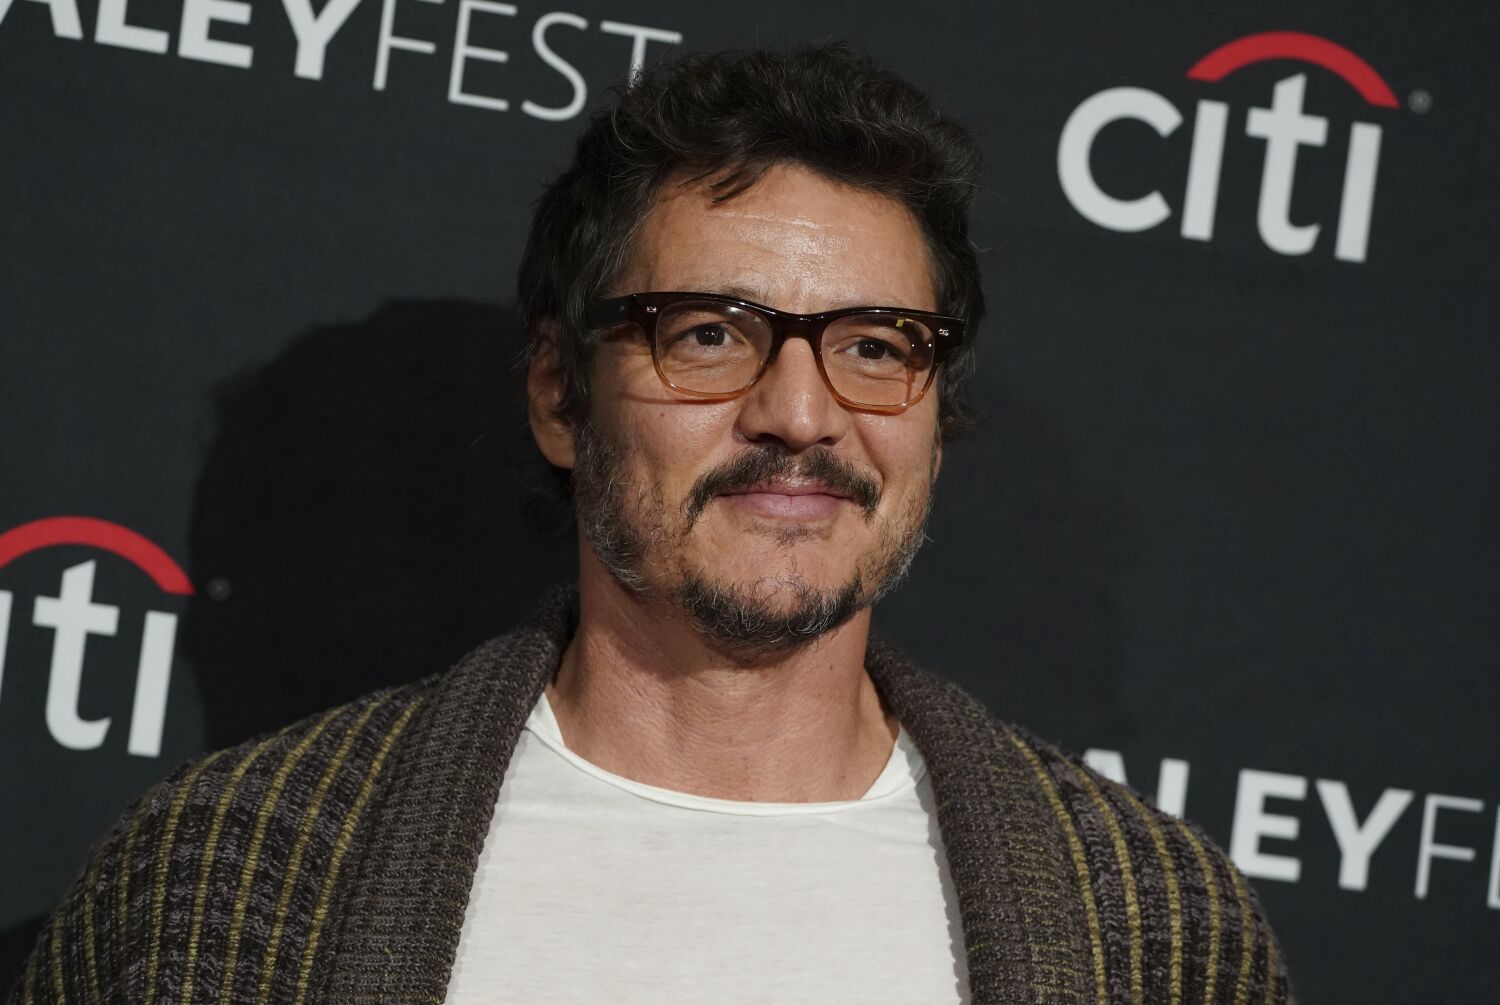 Pedro Pascal recounts his family’s ‘unbelievable’ story about fleeing Chile